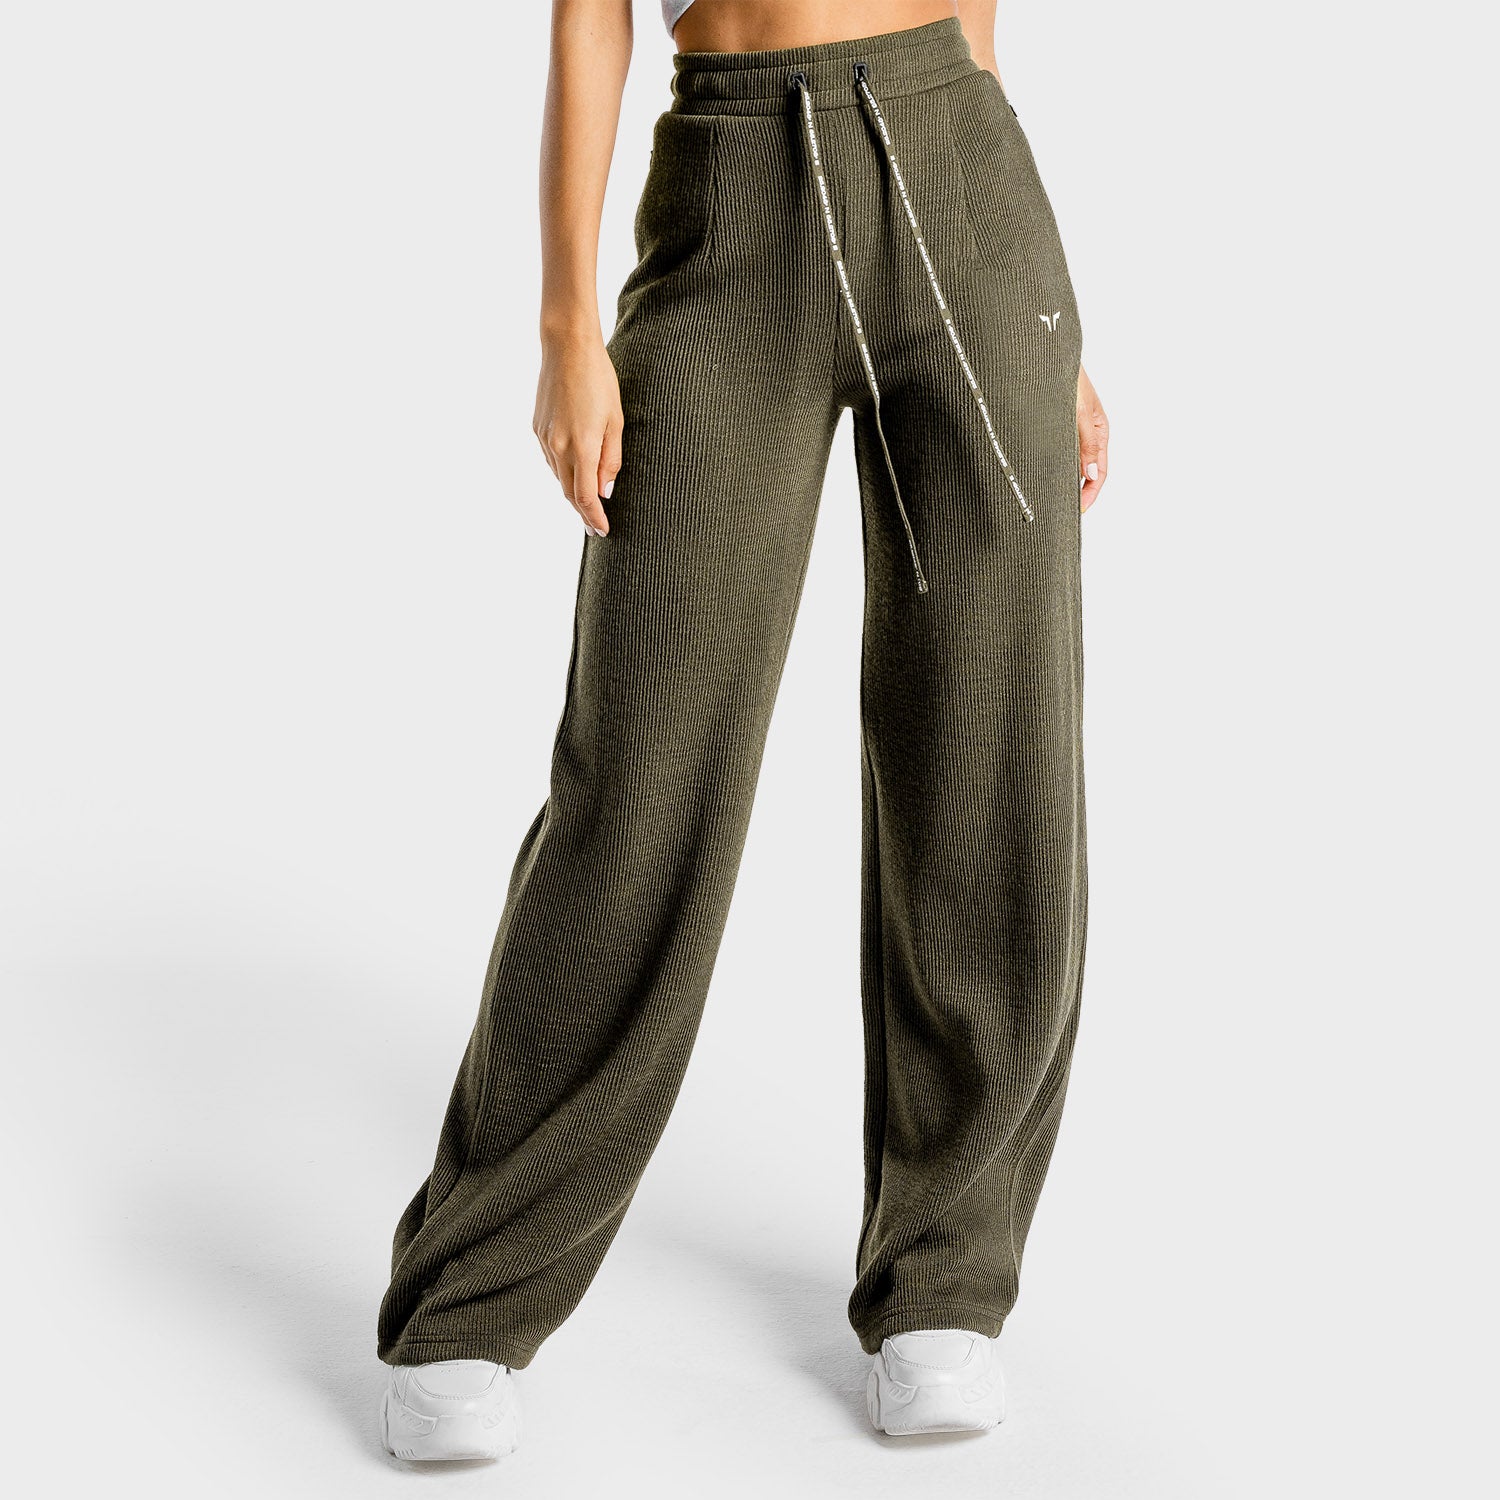 AE, Luxe Wide Leg Pants - Olive, Workout Pants Women